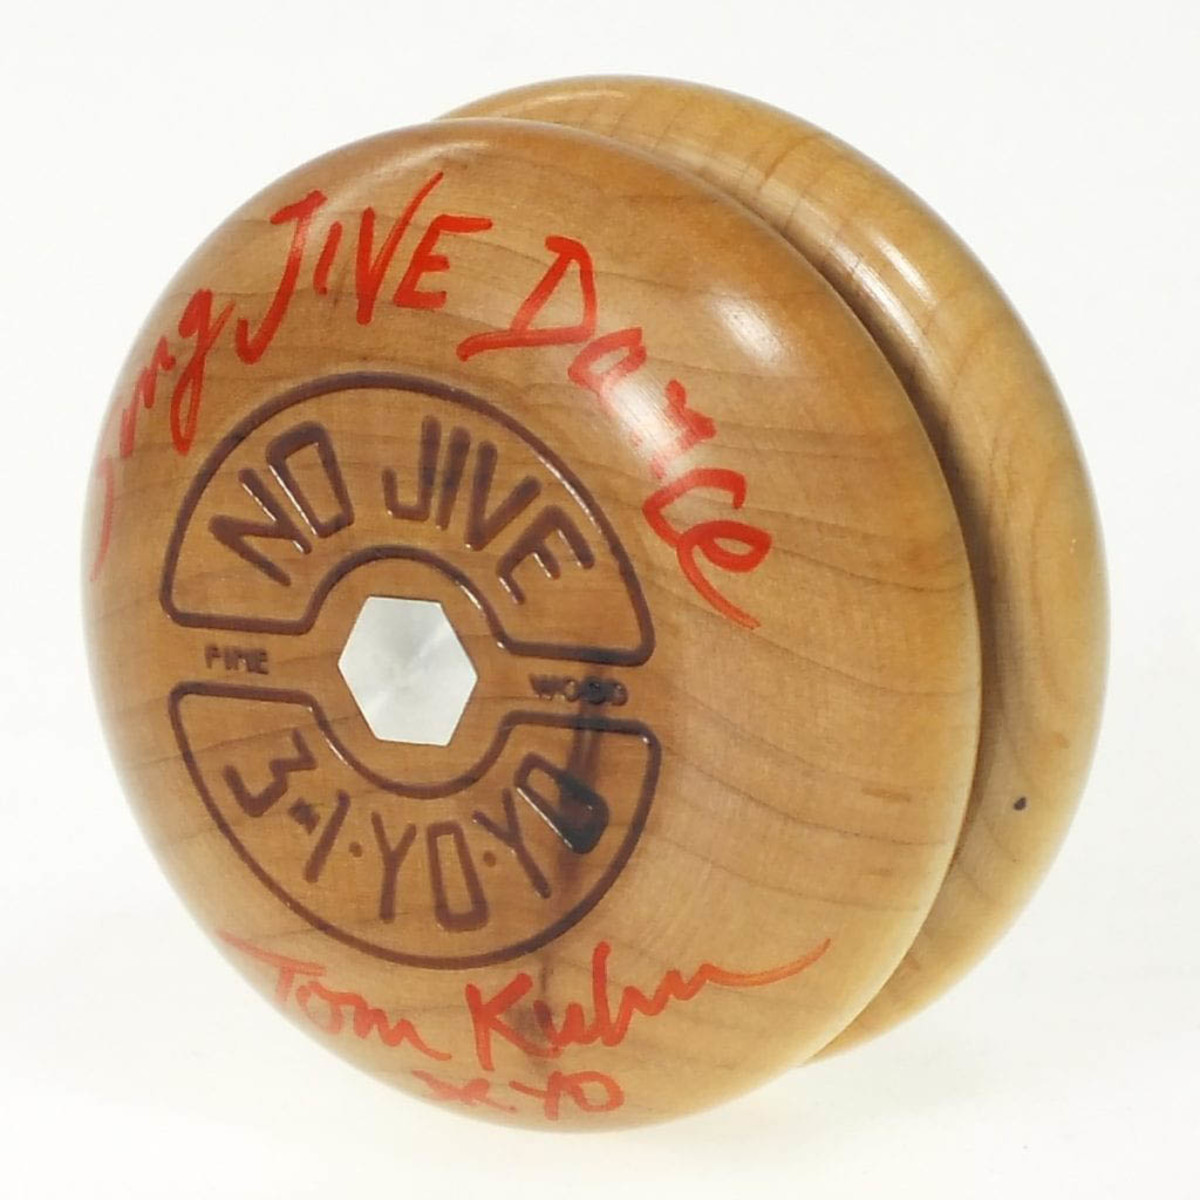 A Tom Kuhn-signed No Jive 3 in 1 in the museum’s collection. This iconic wooden yo-yo was the inspiration for Big Yo.